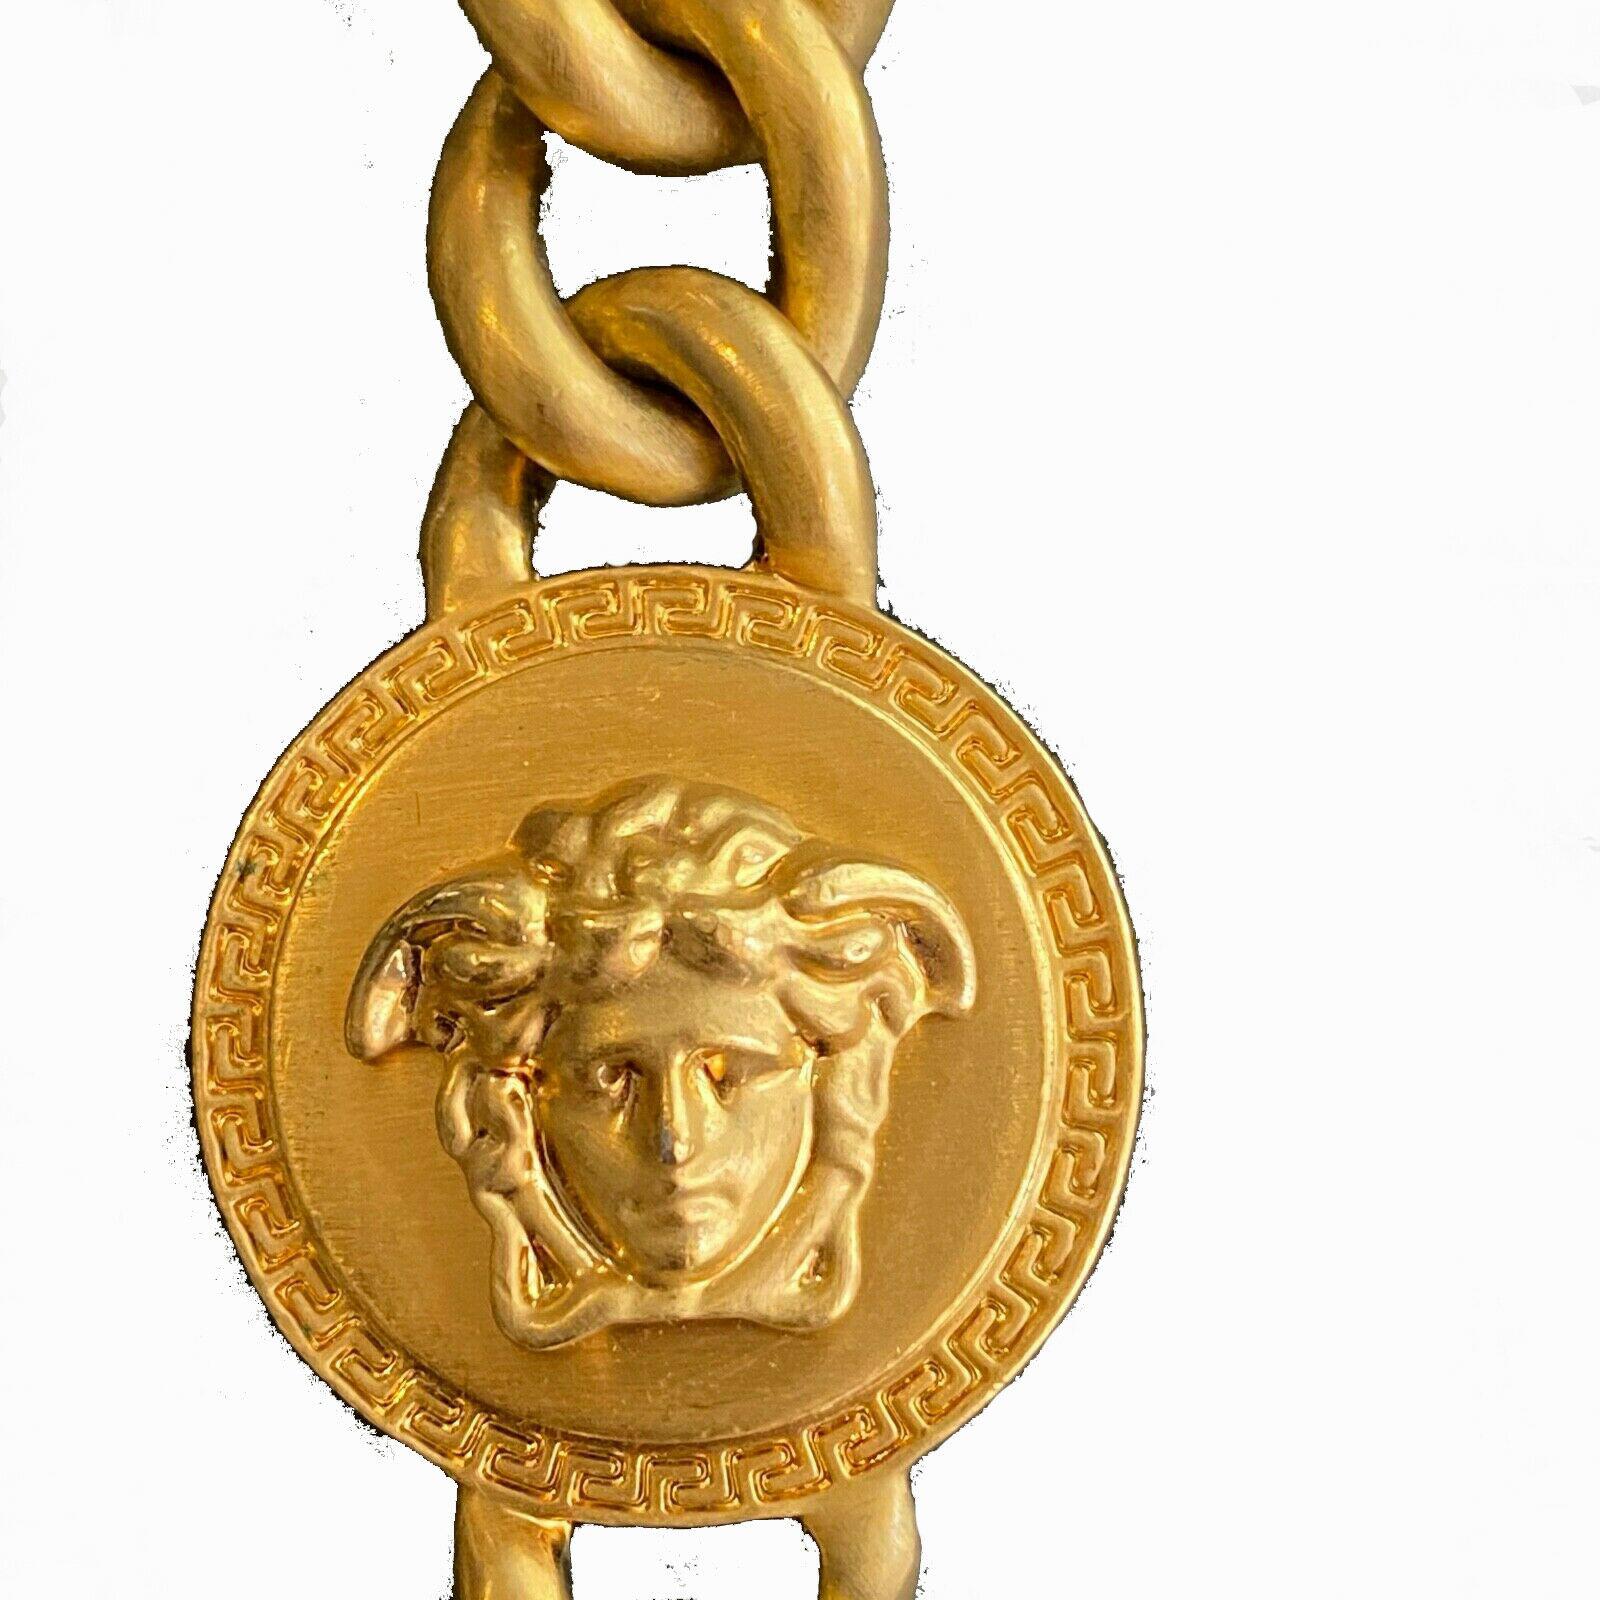 New VERSACE 24K GOLD PLATED 5 MEDUSA PENDANT CHAIN NECKLACE 1